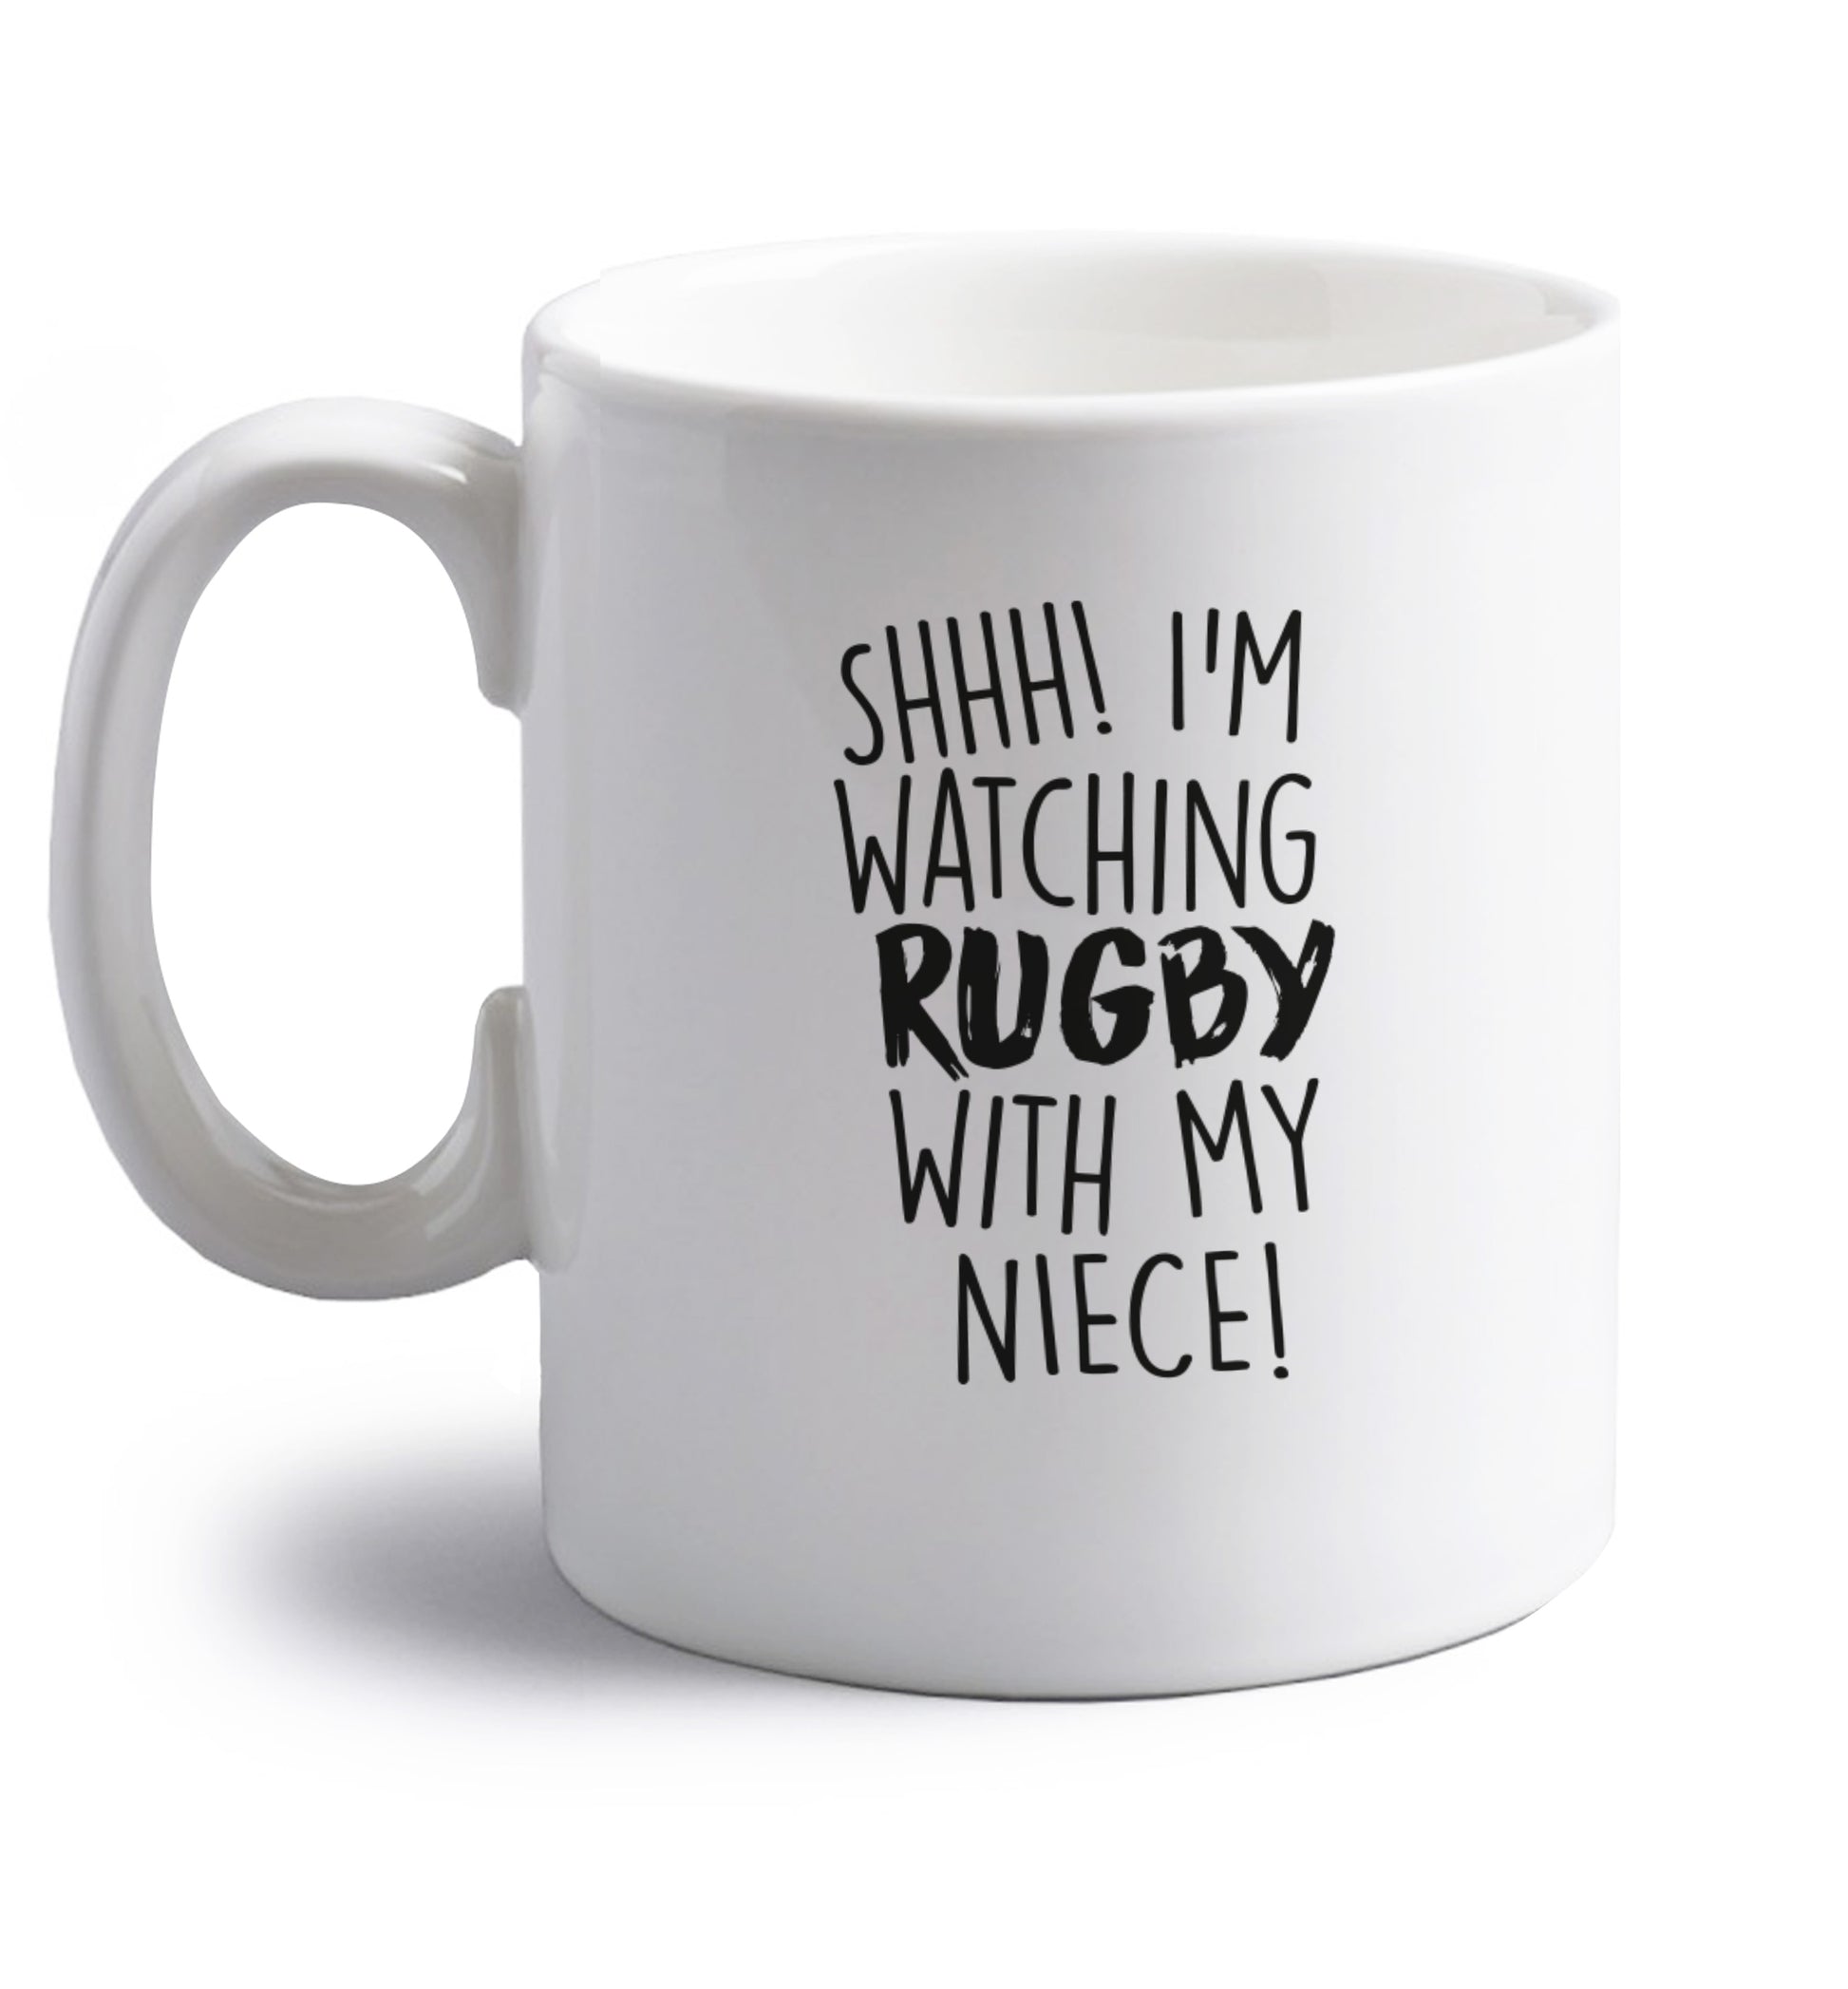 Shh.. I'm watching rugby with my niece right handed white ceramic mug 